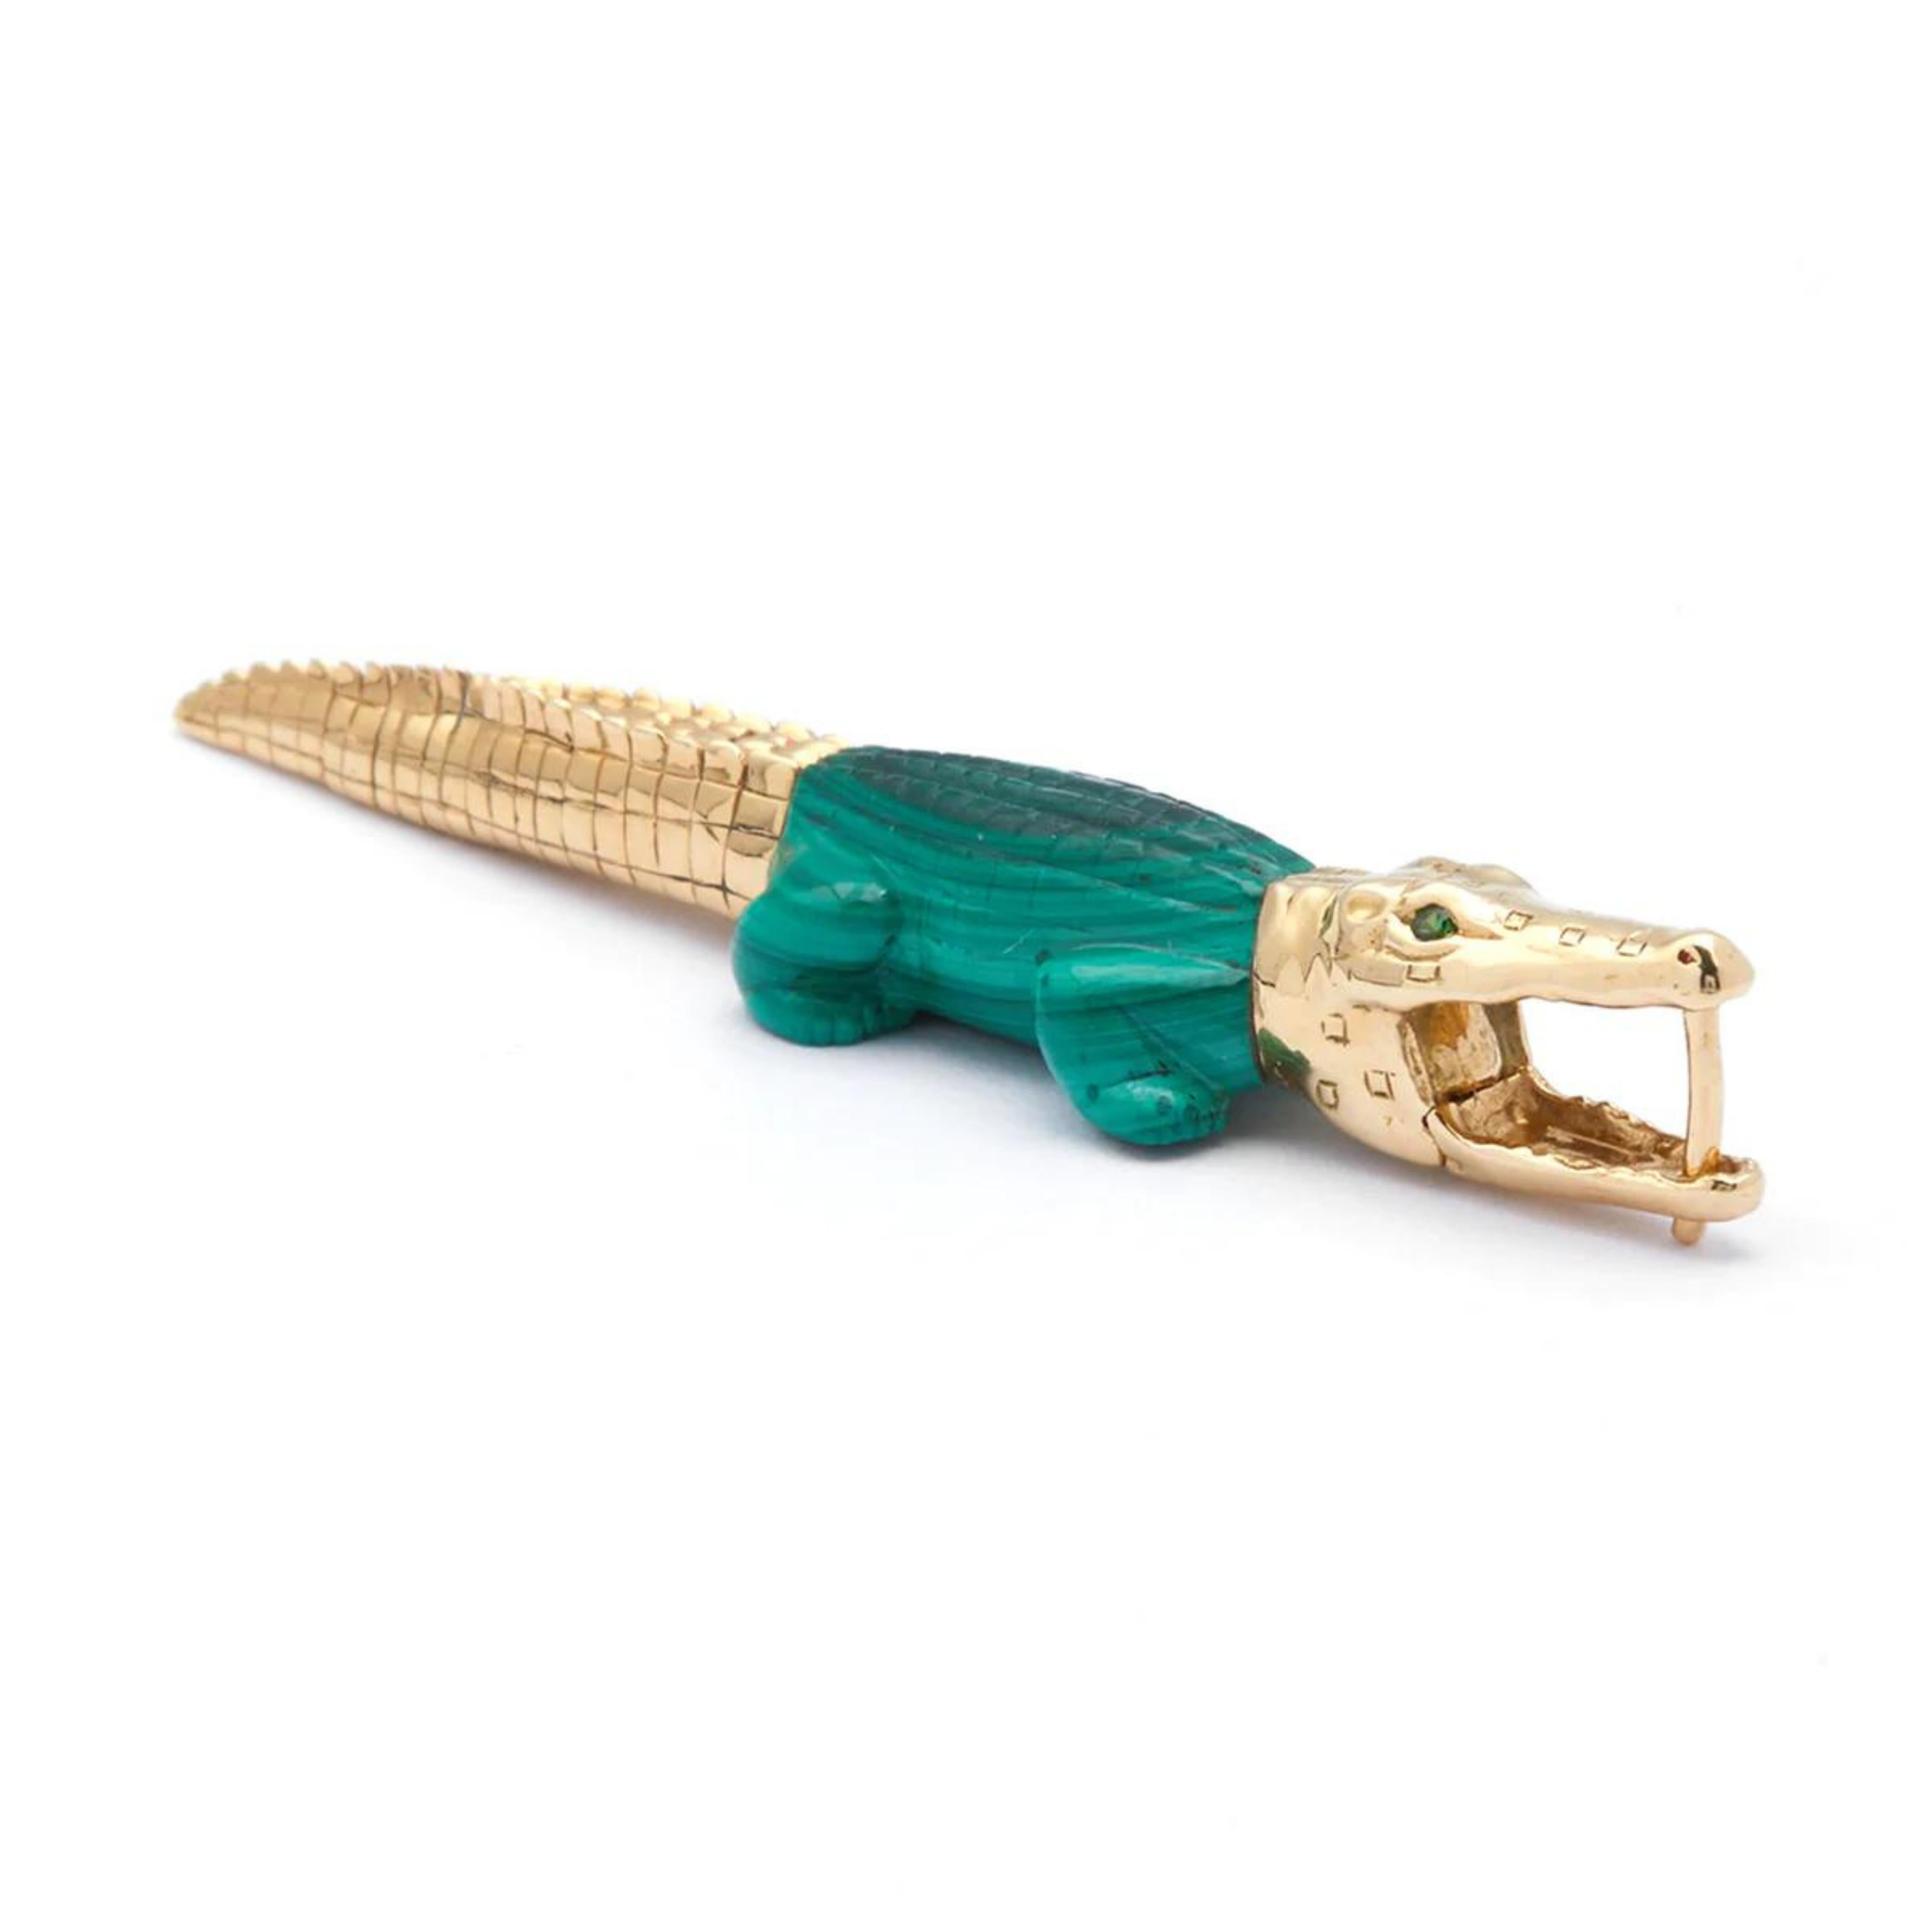 Bibi van der Velden Malachite Alligator Earring. Hand-carved to replicate the body of a mini alligator, the 18K yellow gold earring is adorned with tsavorite stones and a malachite carved body.  Shown from the side view.